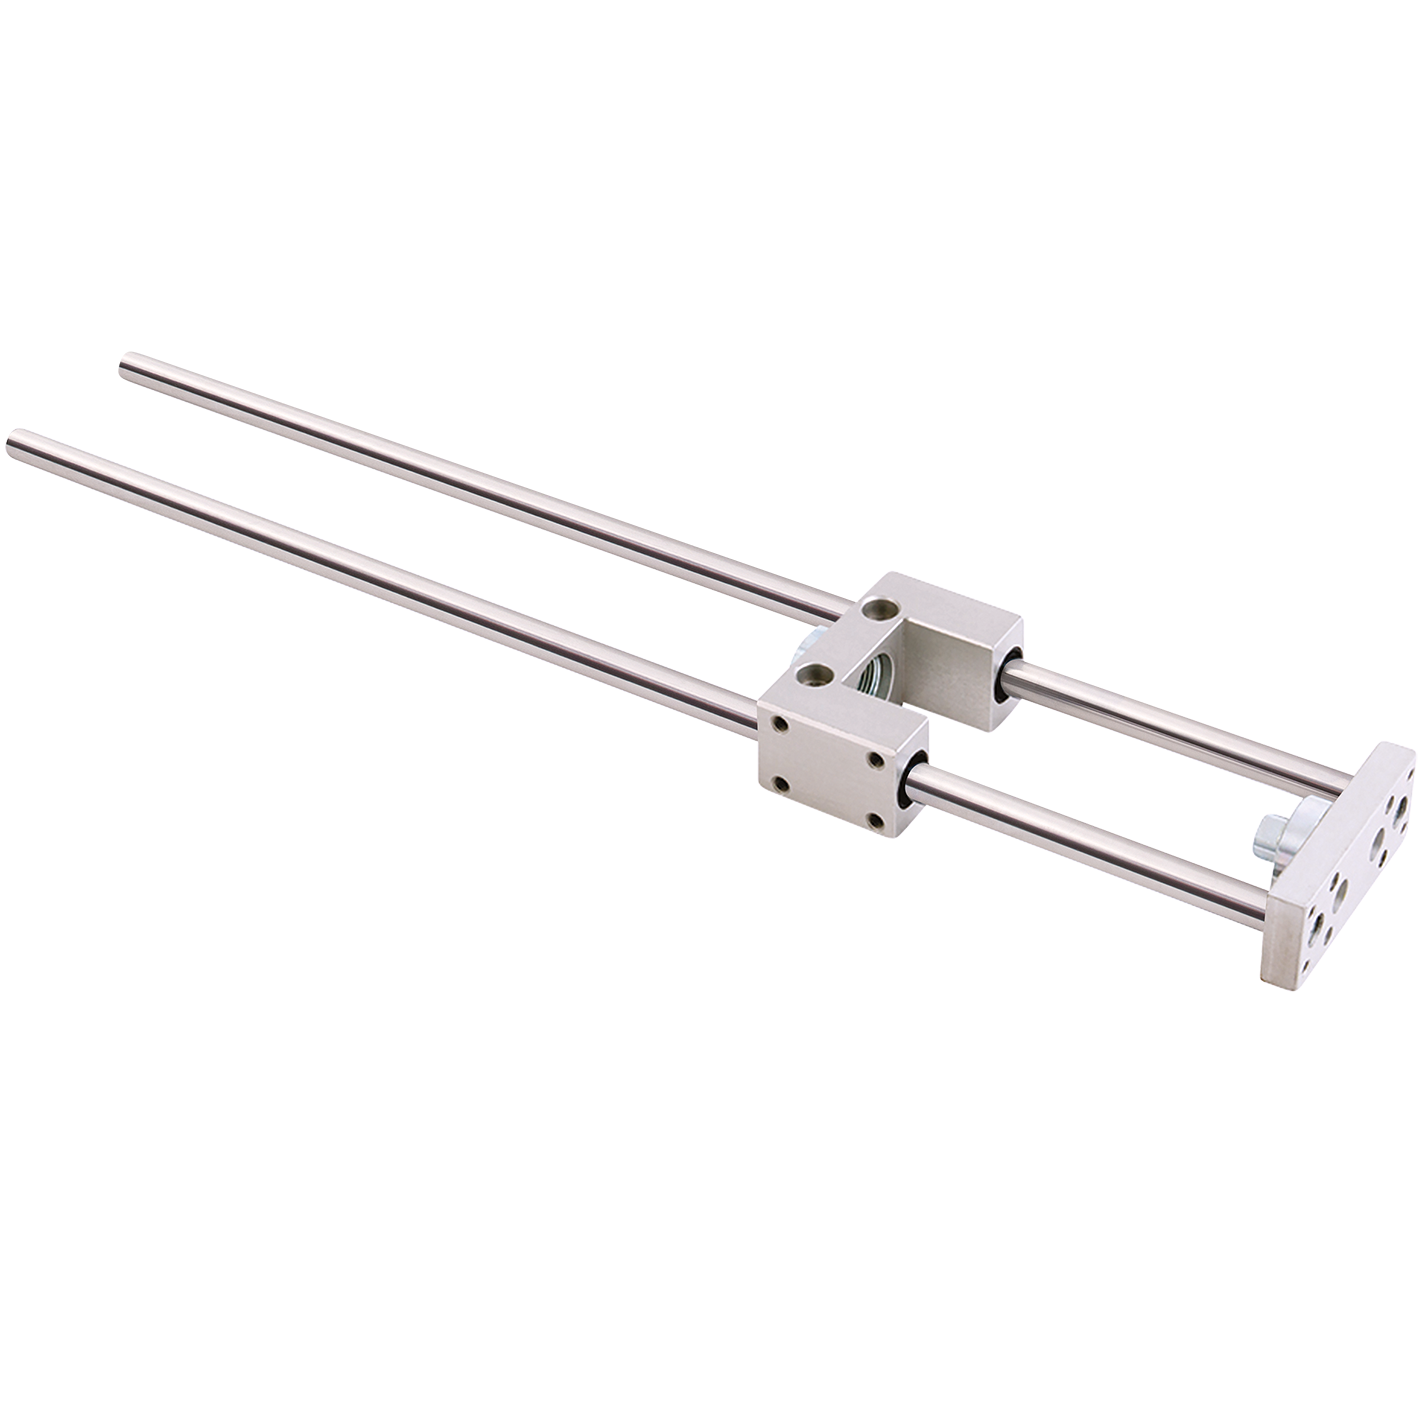 63mm Bore x 200mm Stroke Cylinder Guide Unit